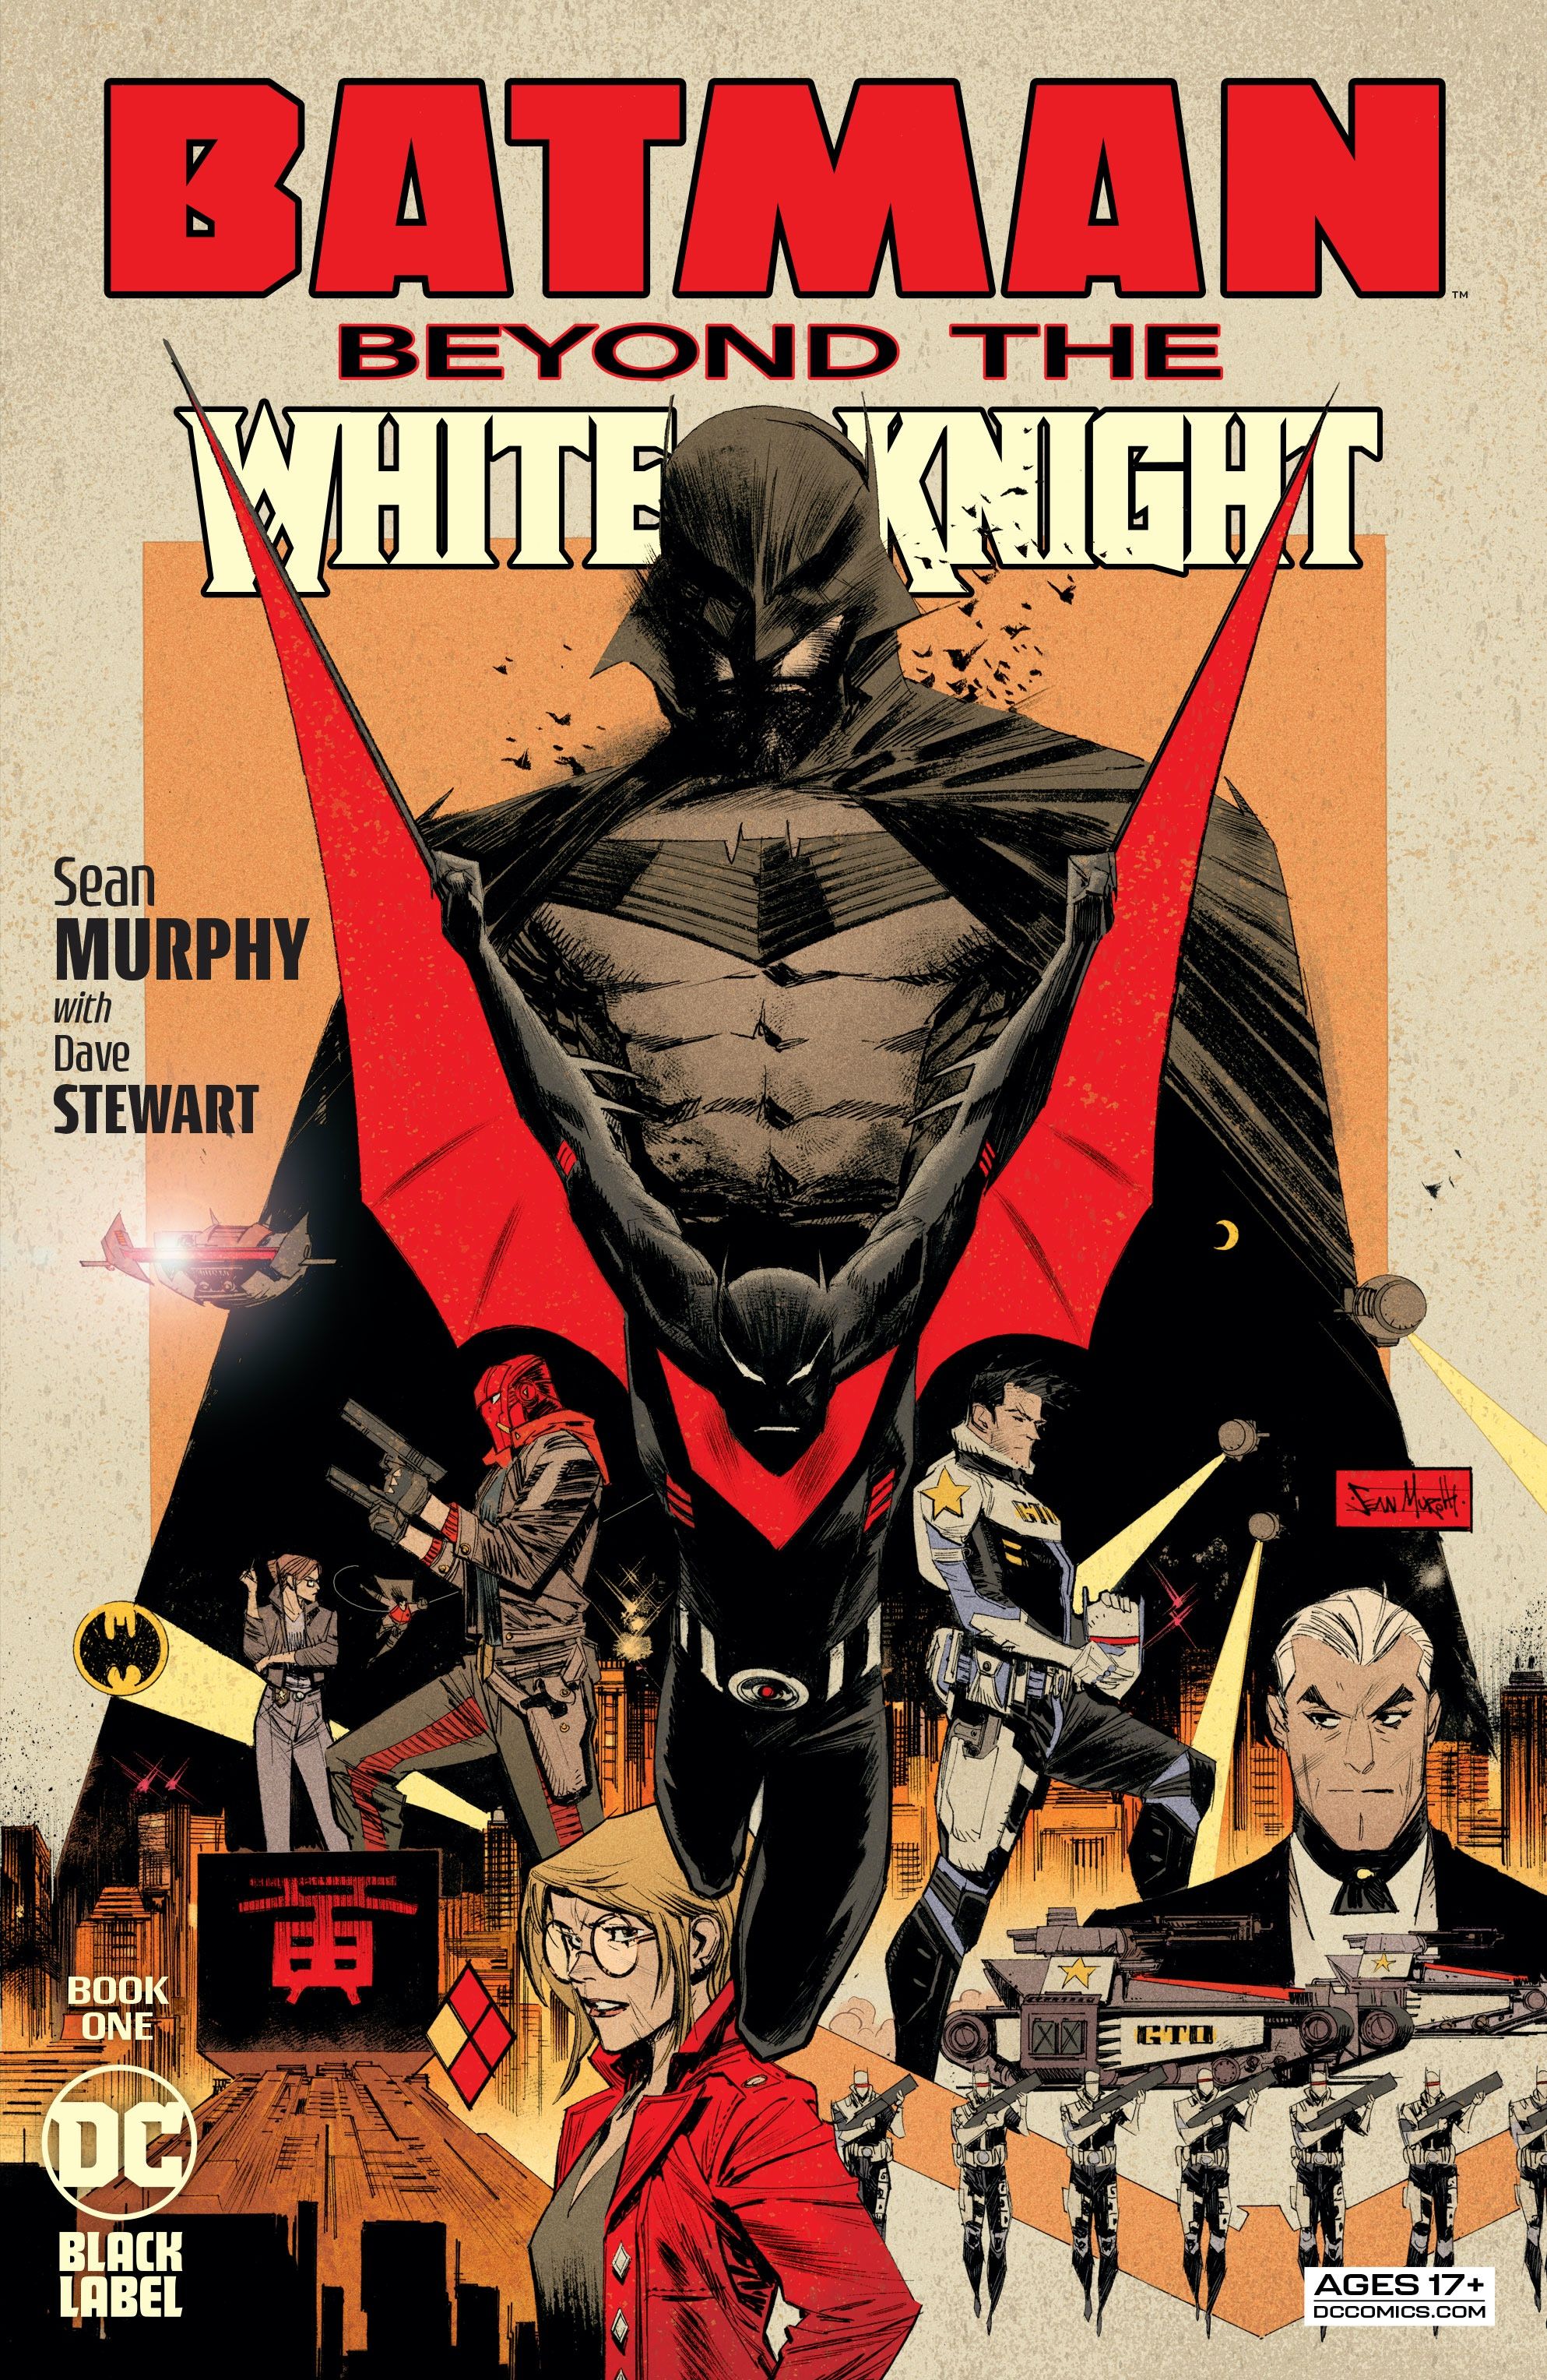 Batman Beyond the White Knight preview cover featuring Batman Beyond and Red Hood